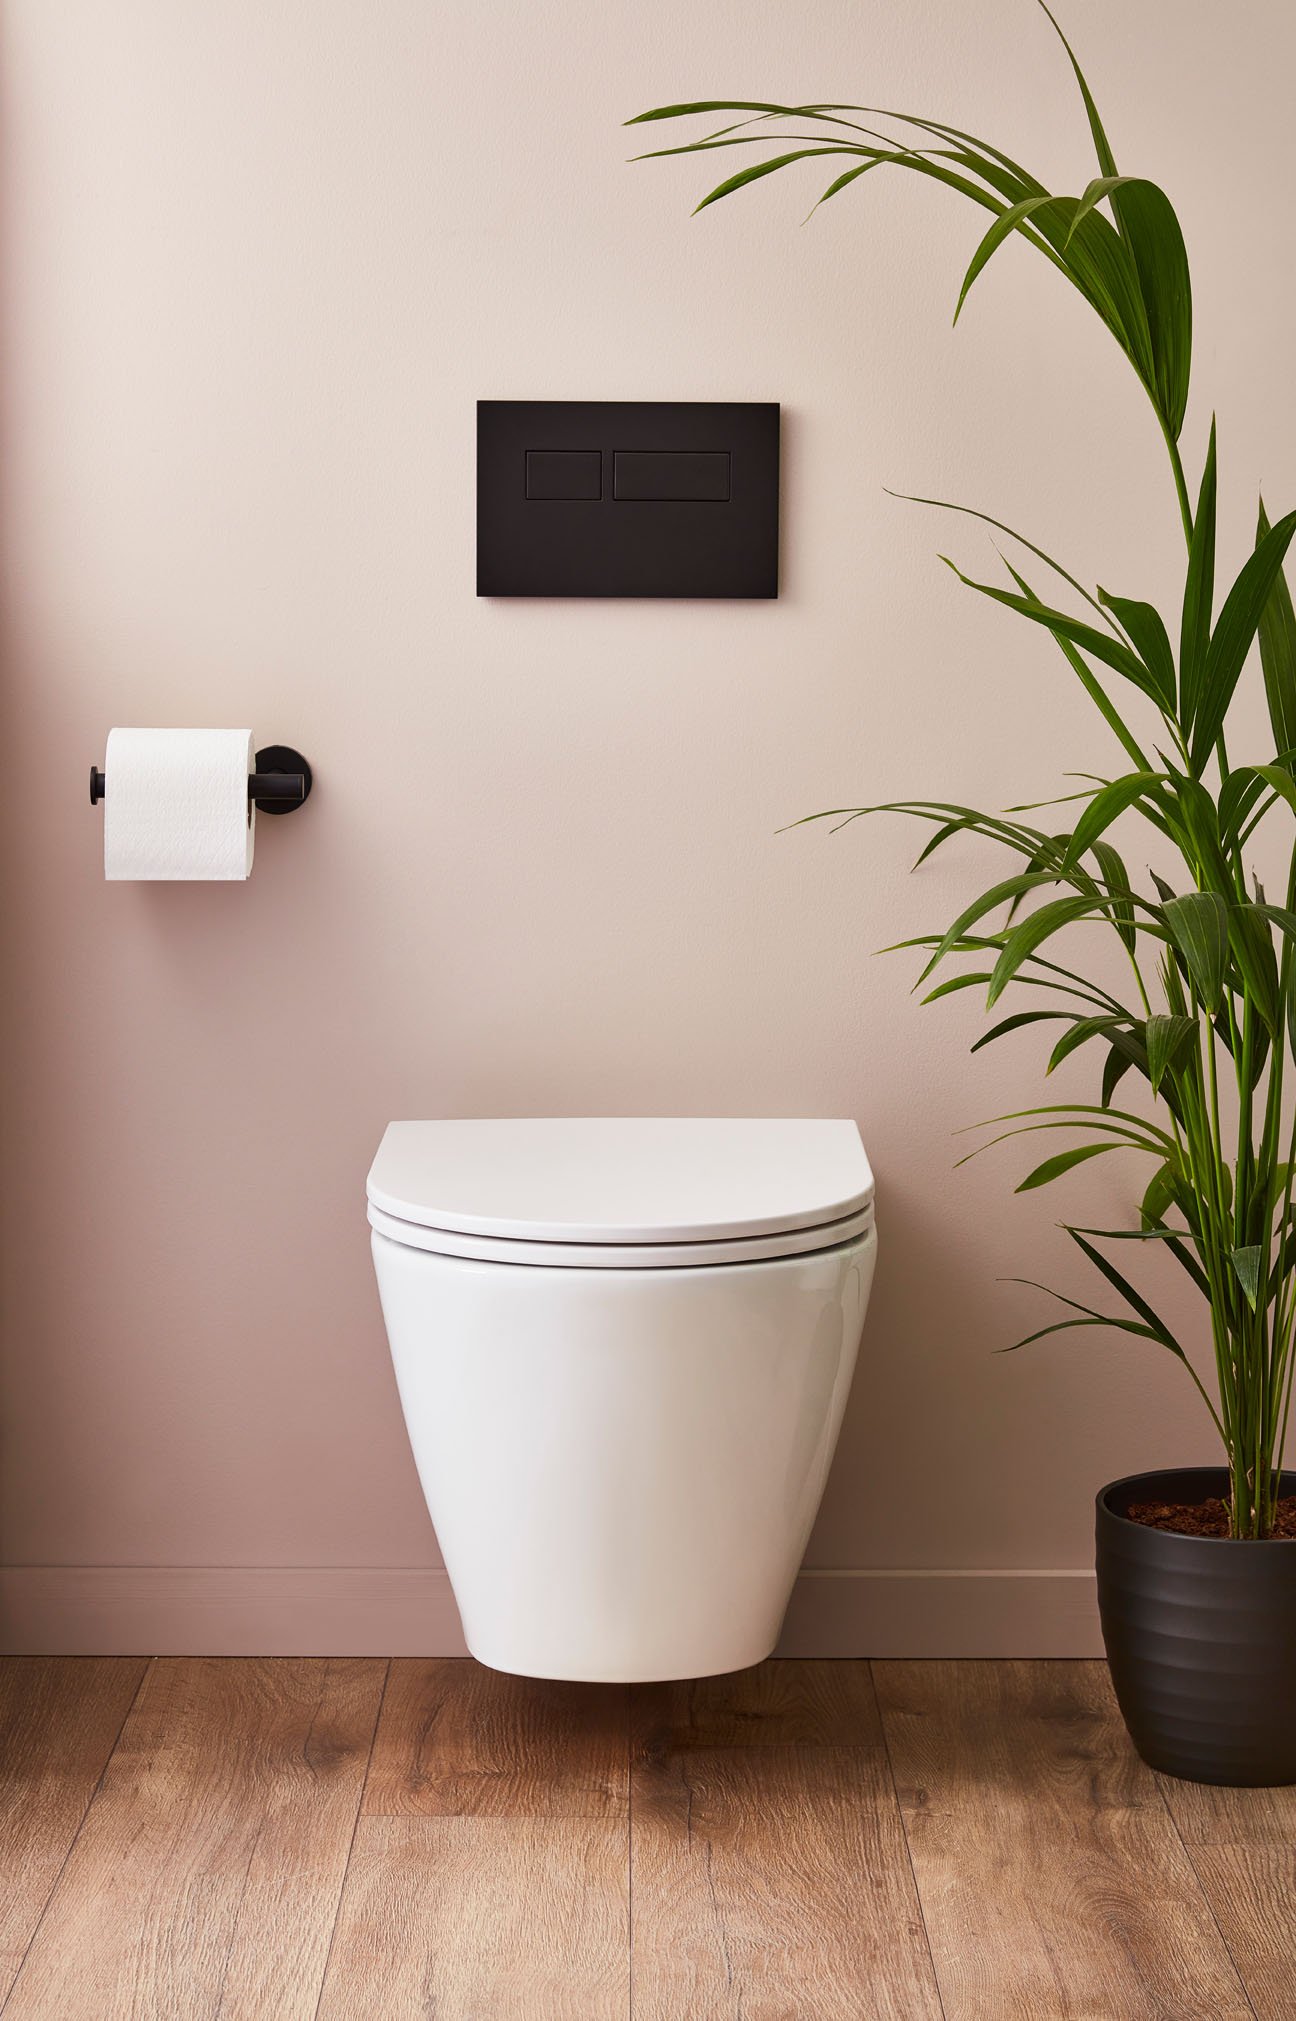 Our Toilet Roll Holder Design Guide